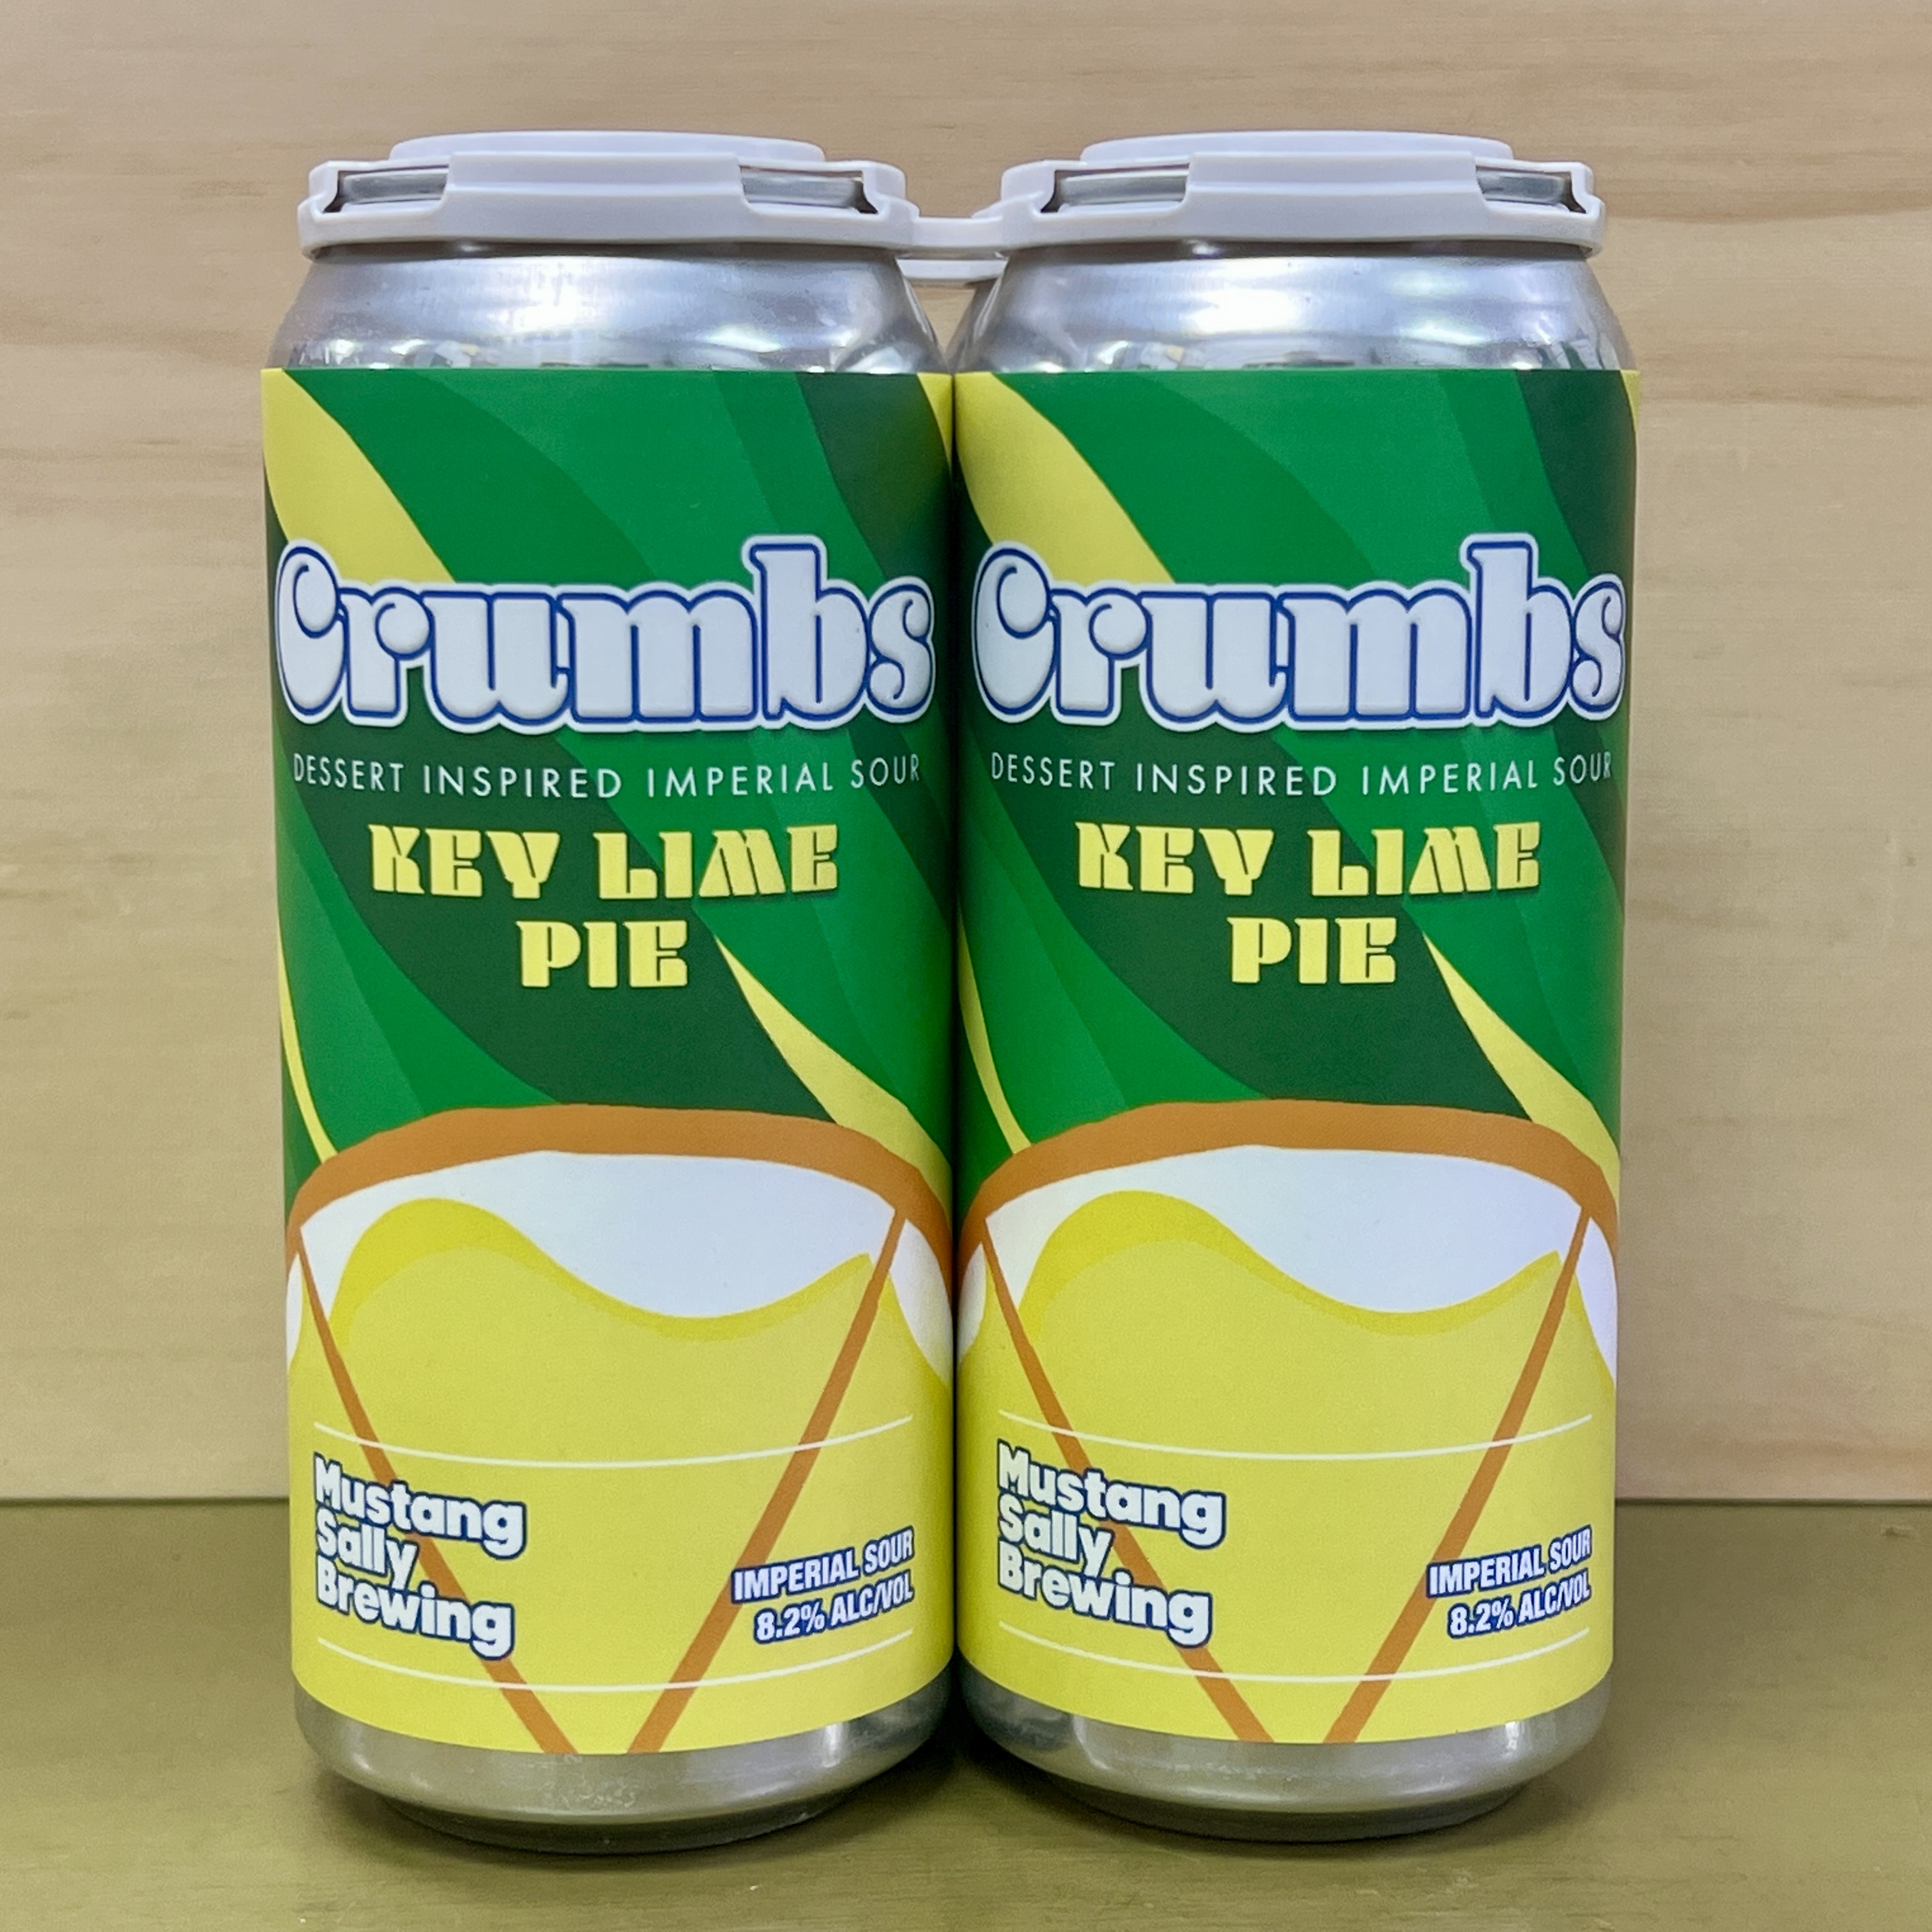 Mustang Sally 'Crumbs' Key Lime Pie Imperial Sour Ale 4 x 16oz cans